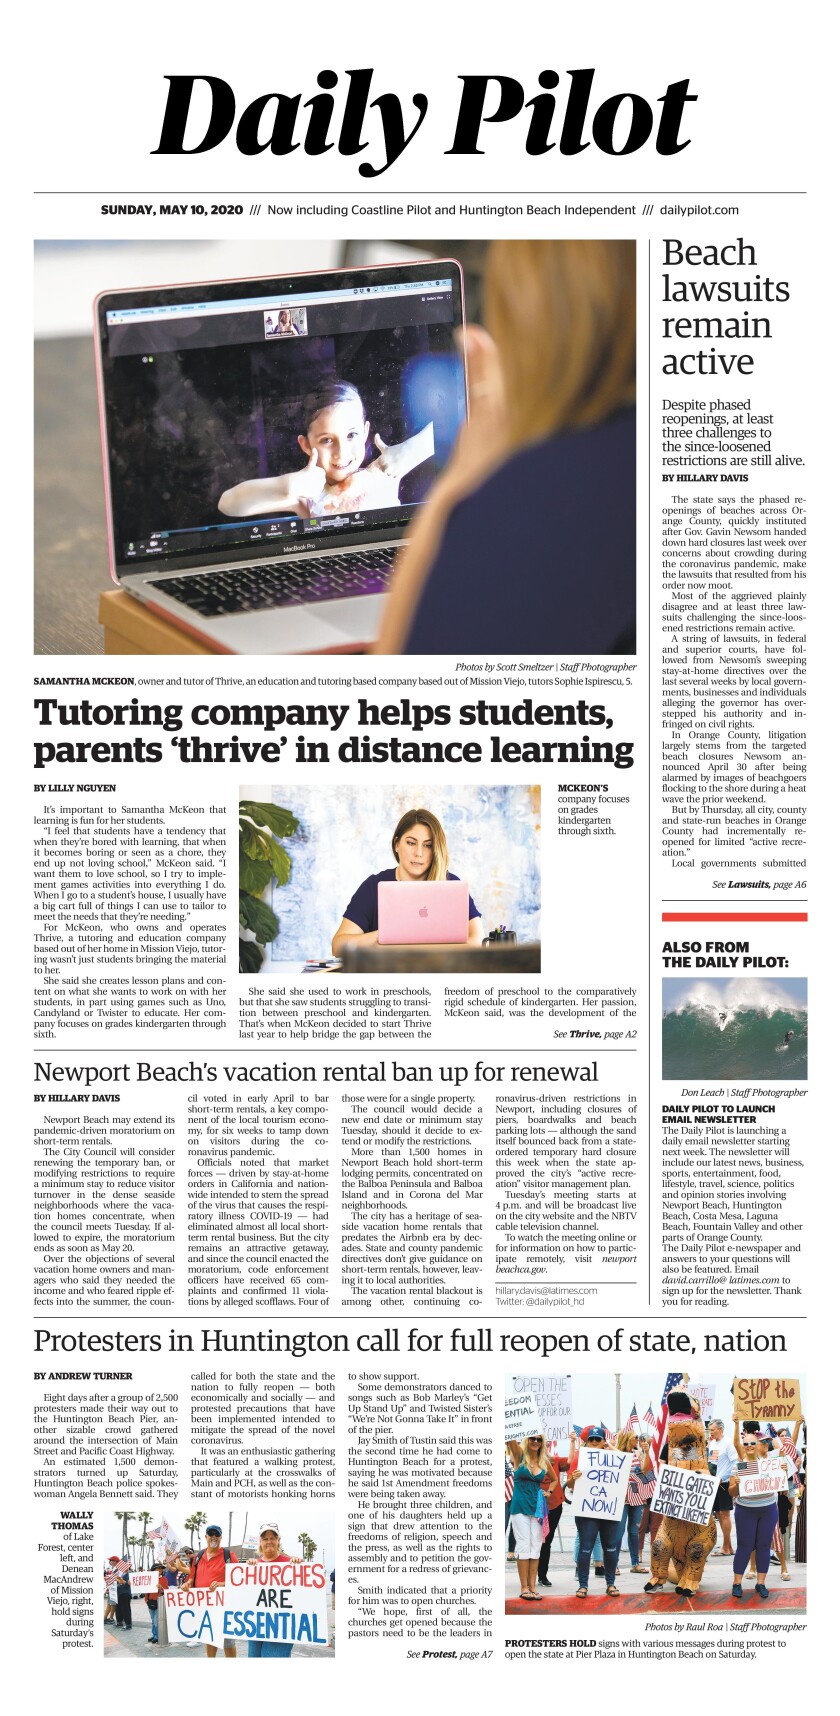 Daily Pilot e-Newspaper: Sunday, May 10, 2020 - Los Angeles Times